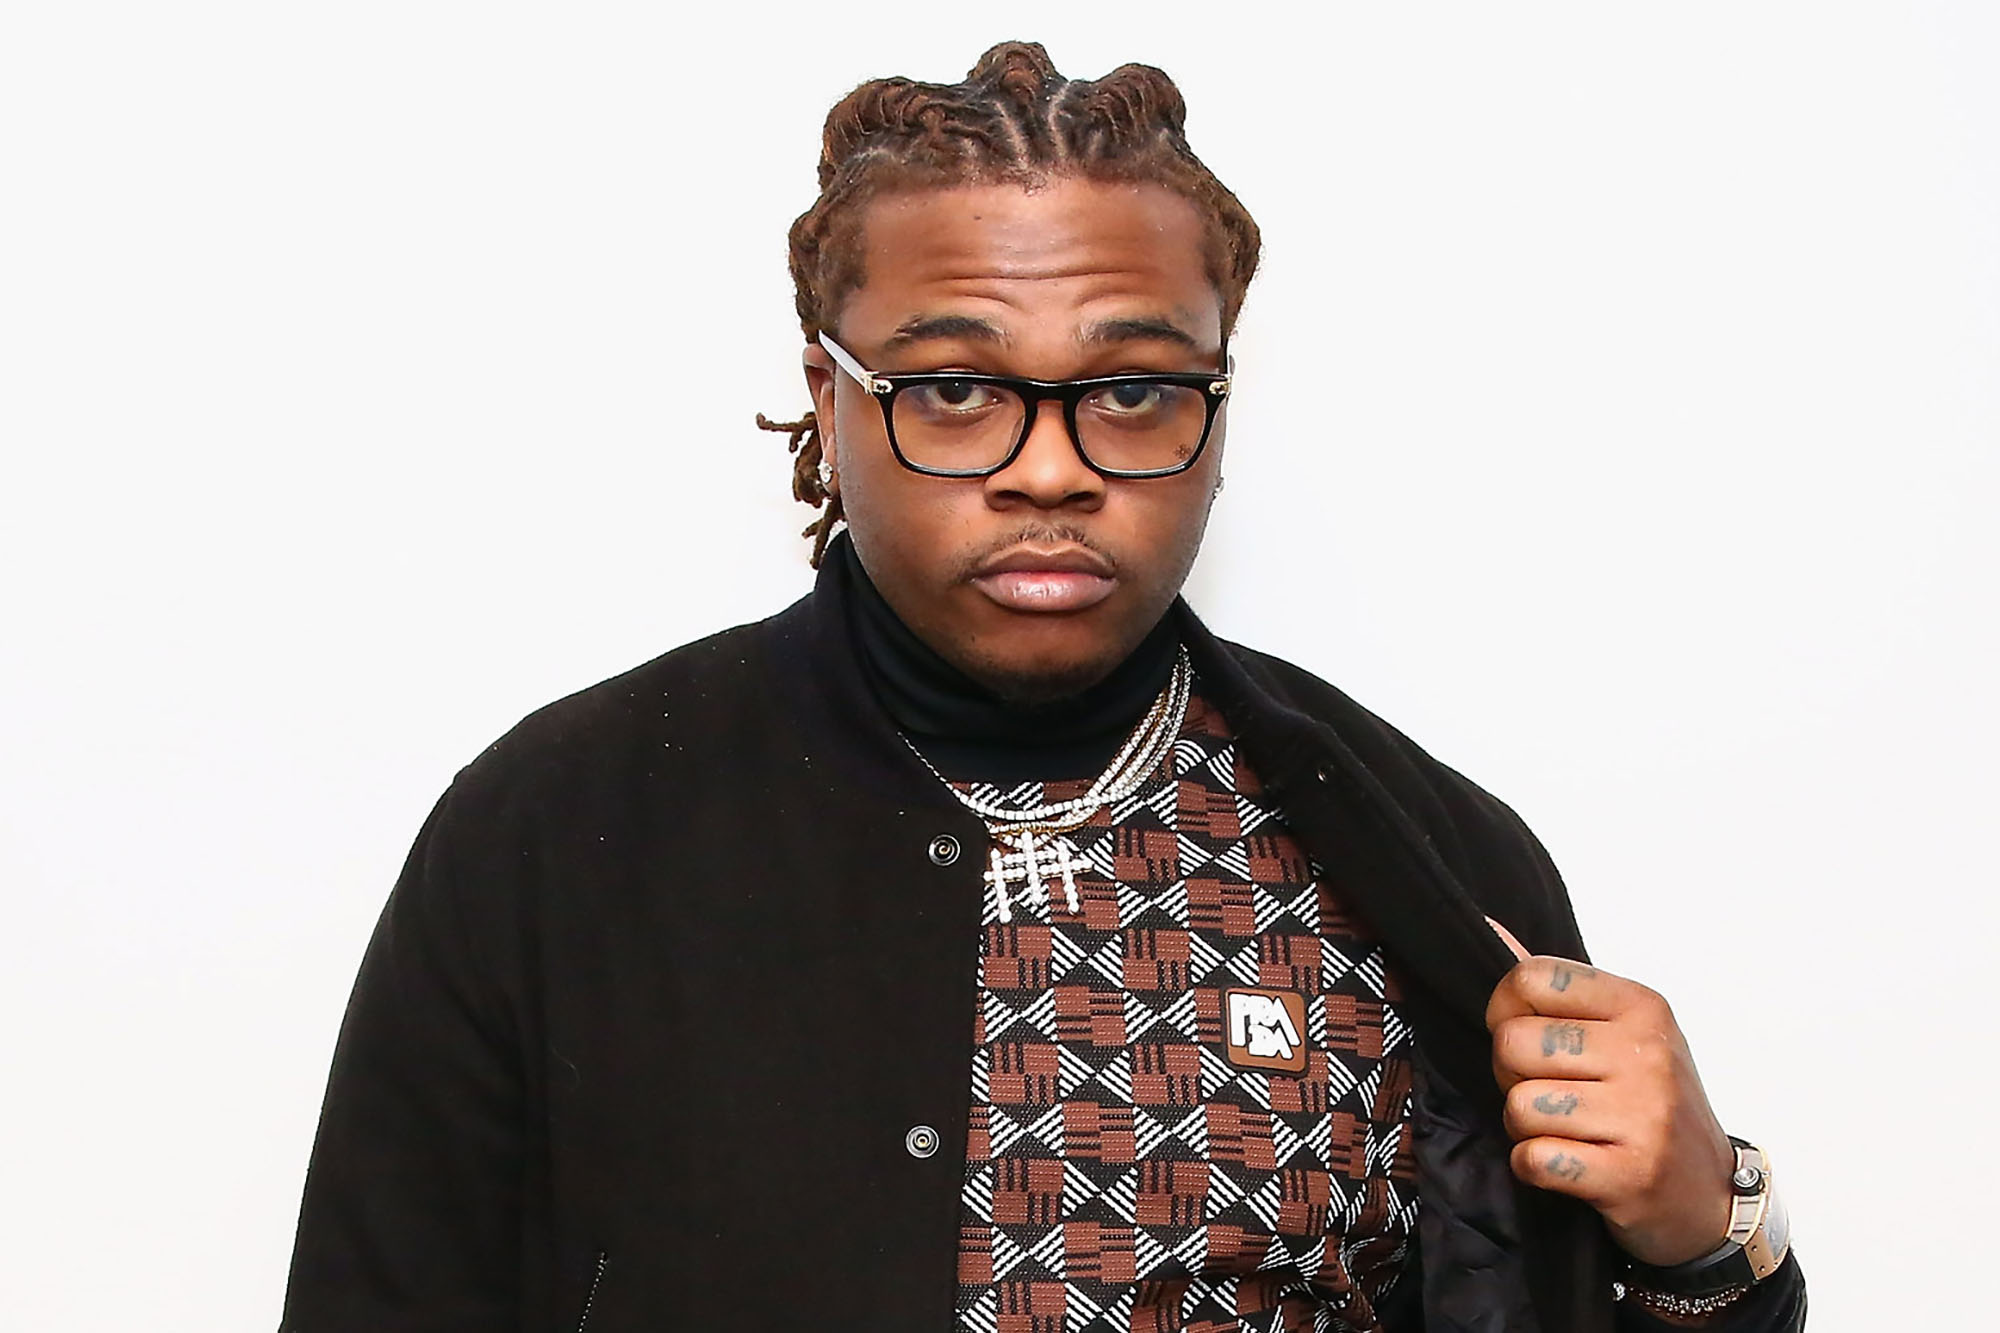 Video Footage Of Gunna Snitching On YSL In Court Surfaces